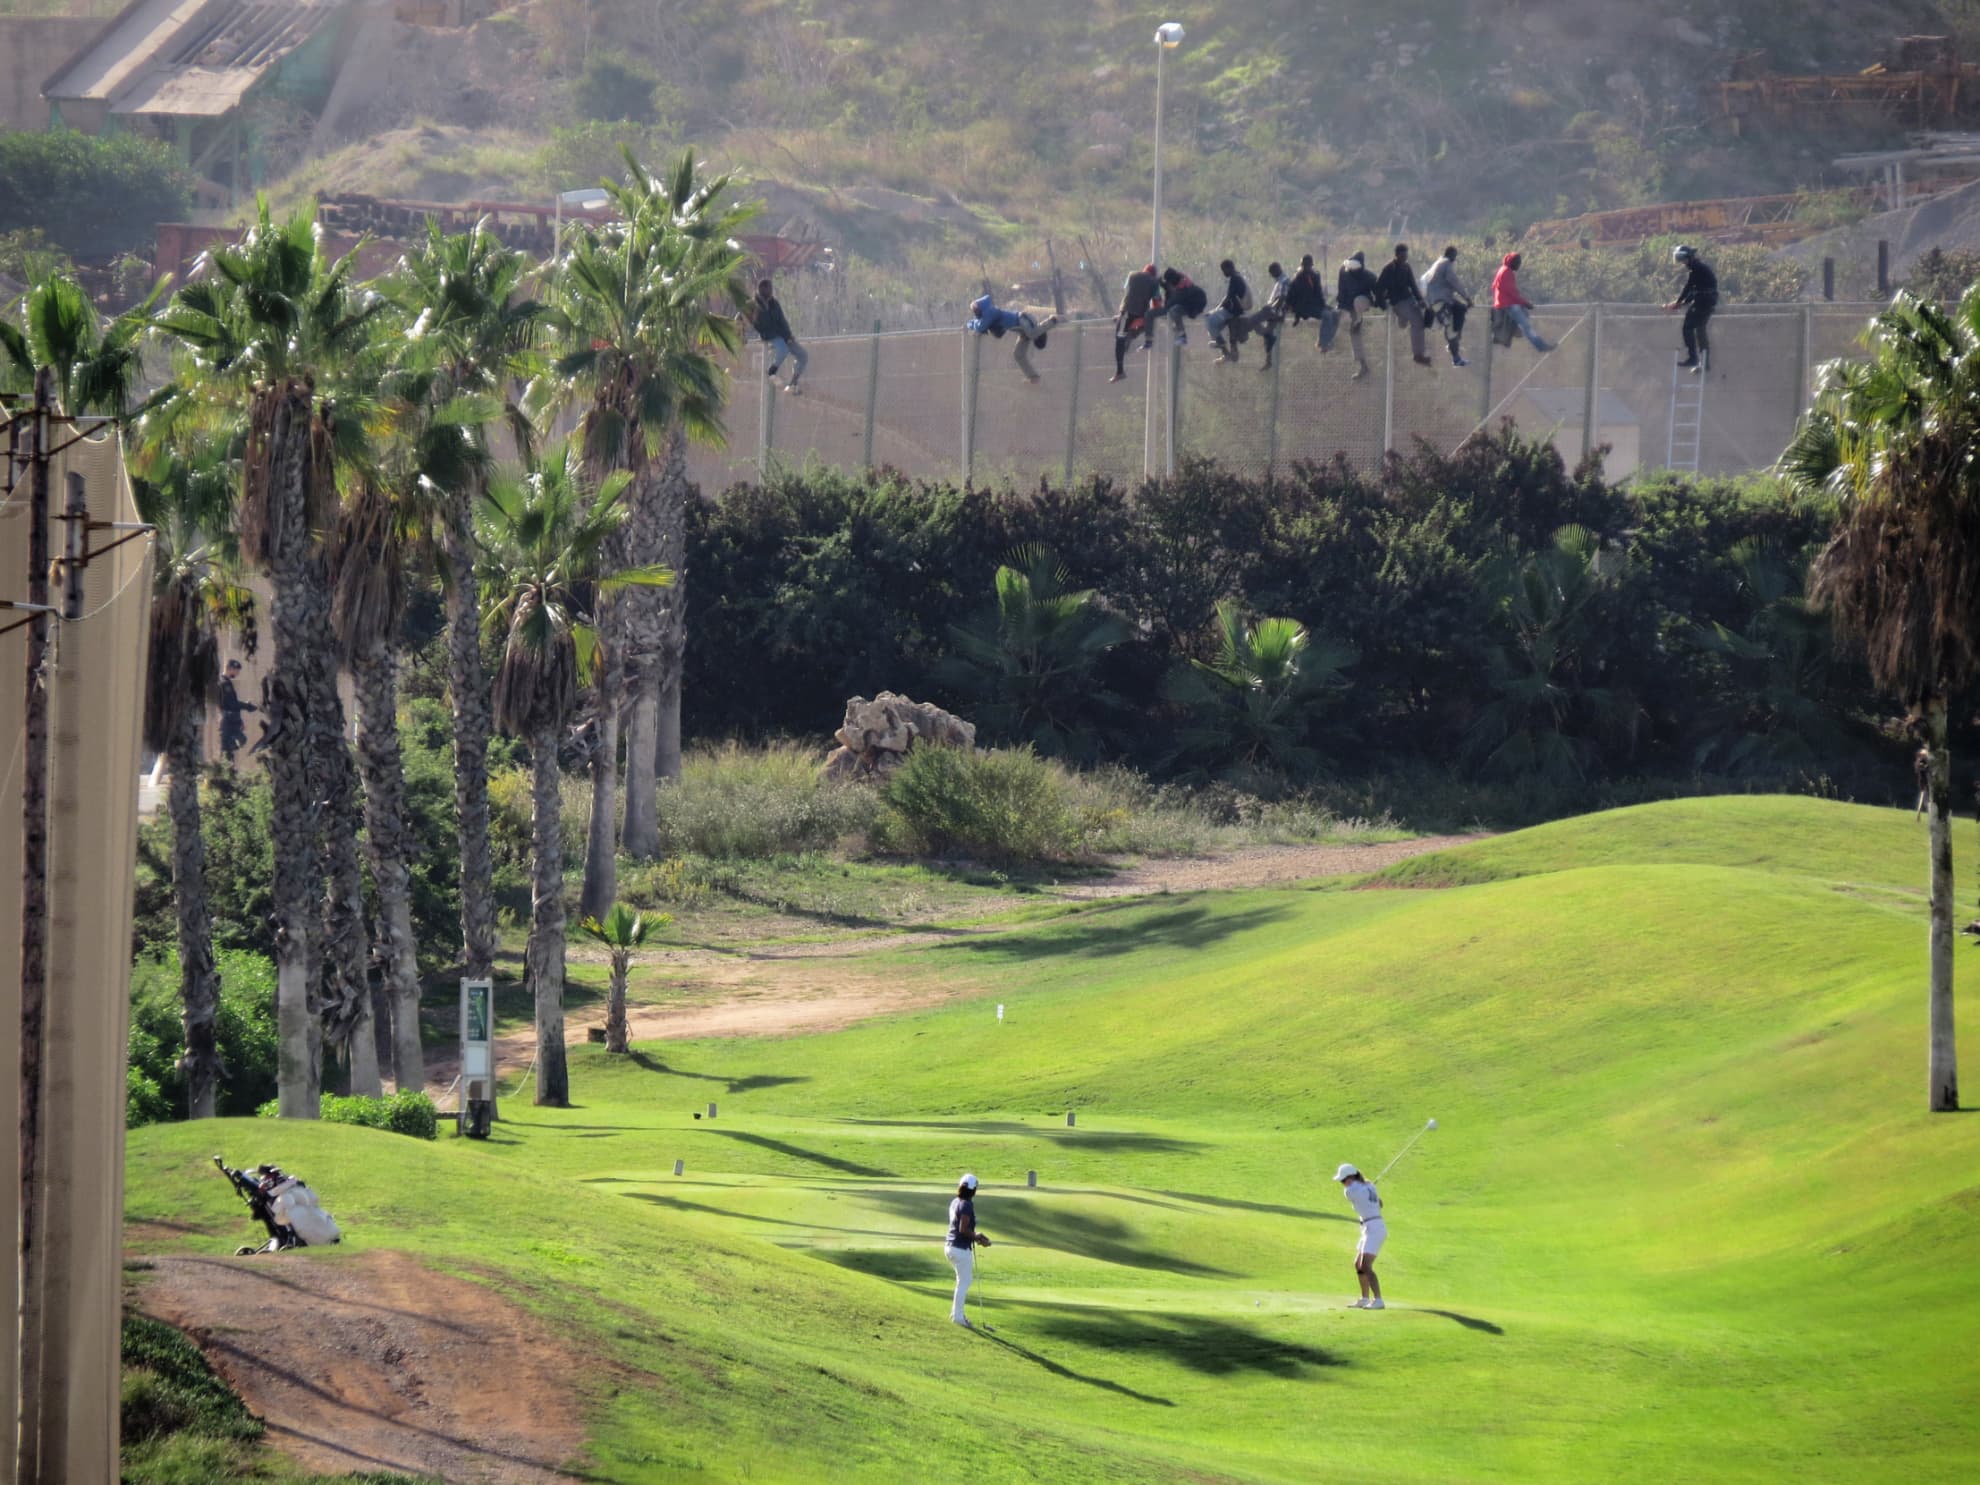 A group of migrants perched on the Melilla fence in front of the golf course in October 2014.